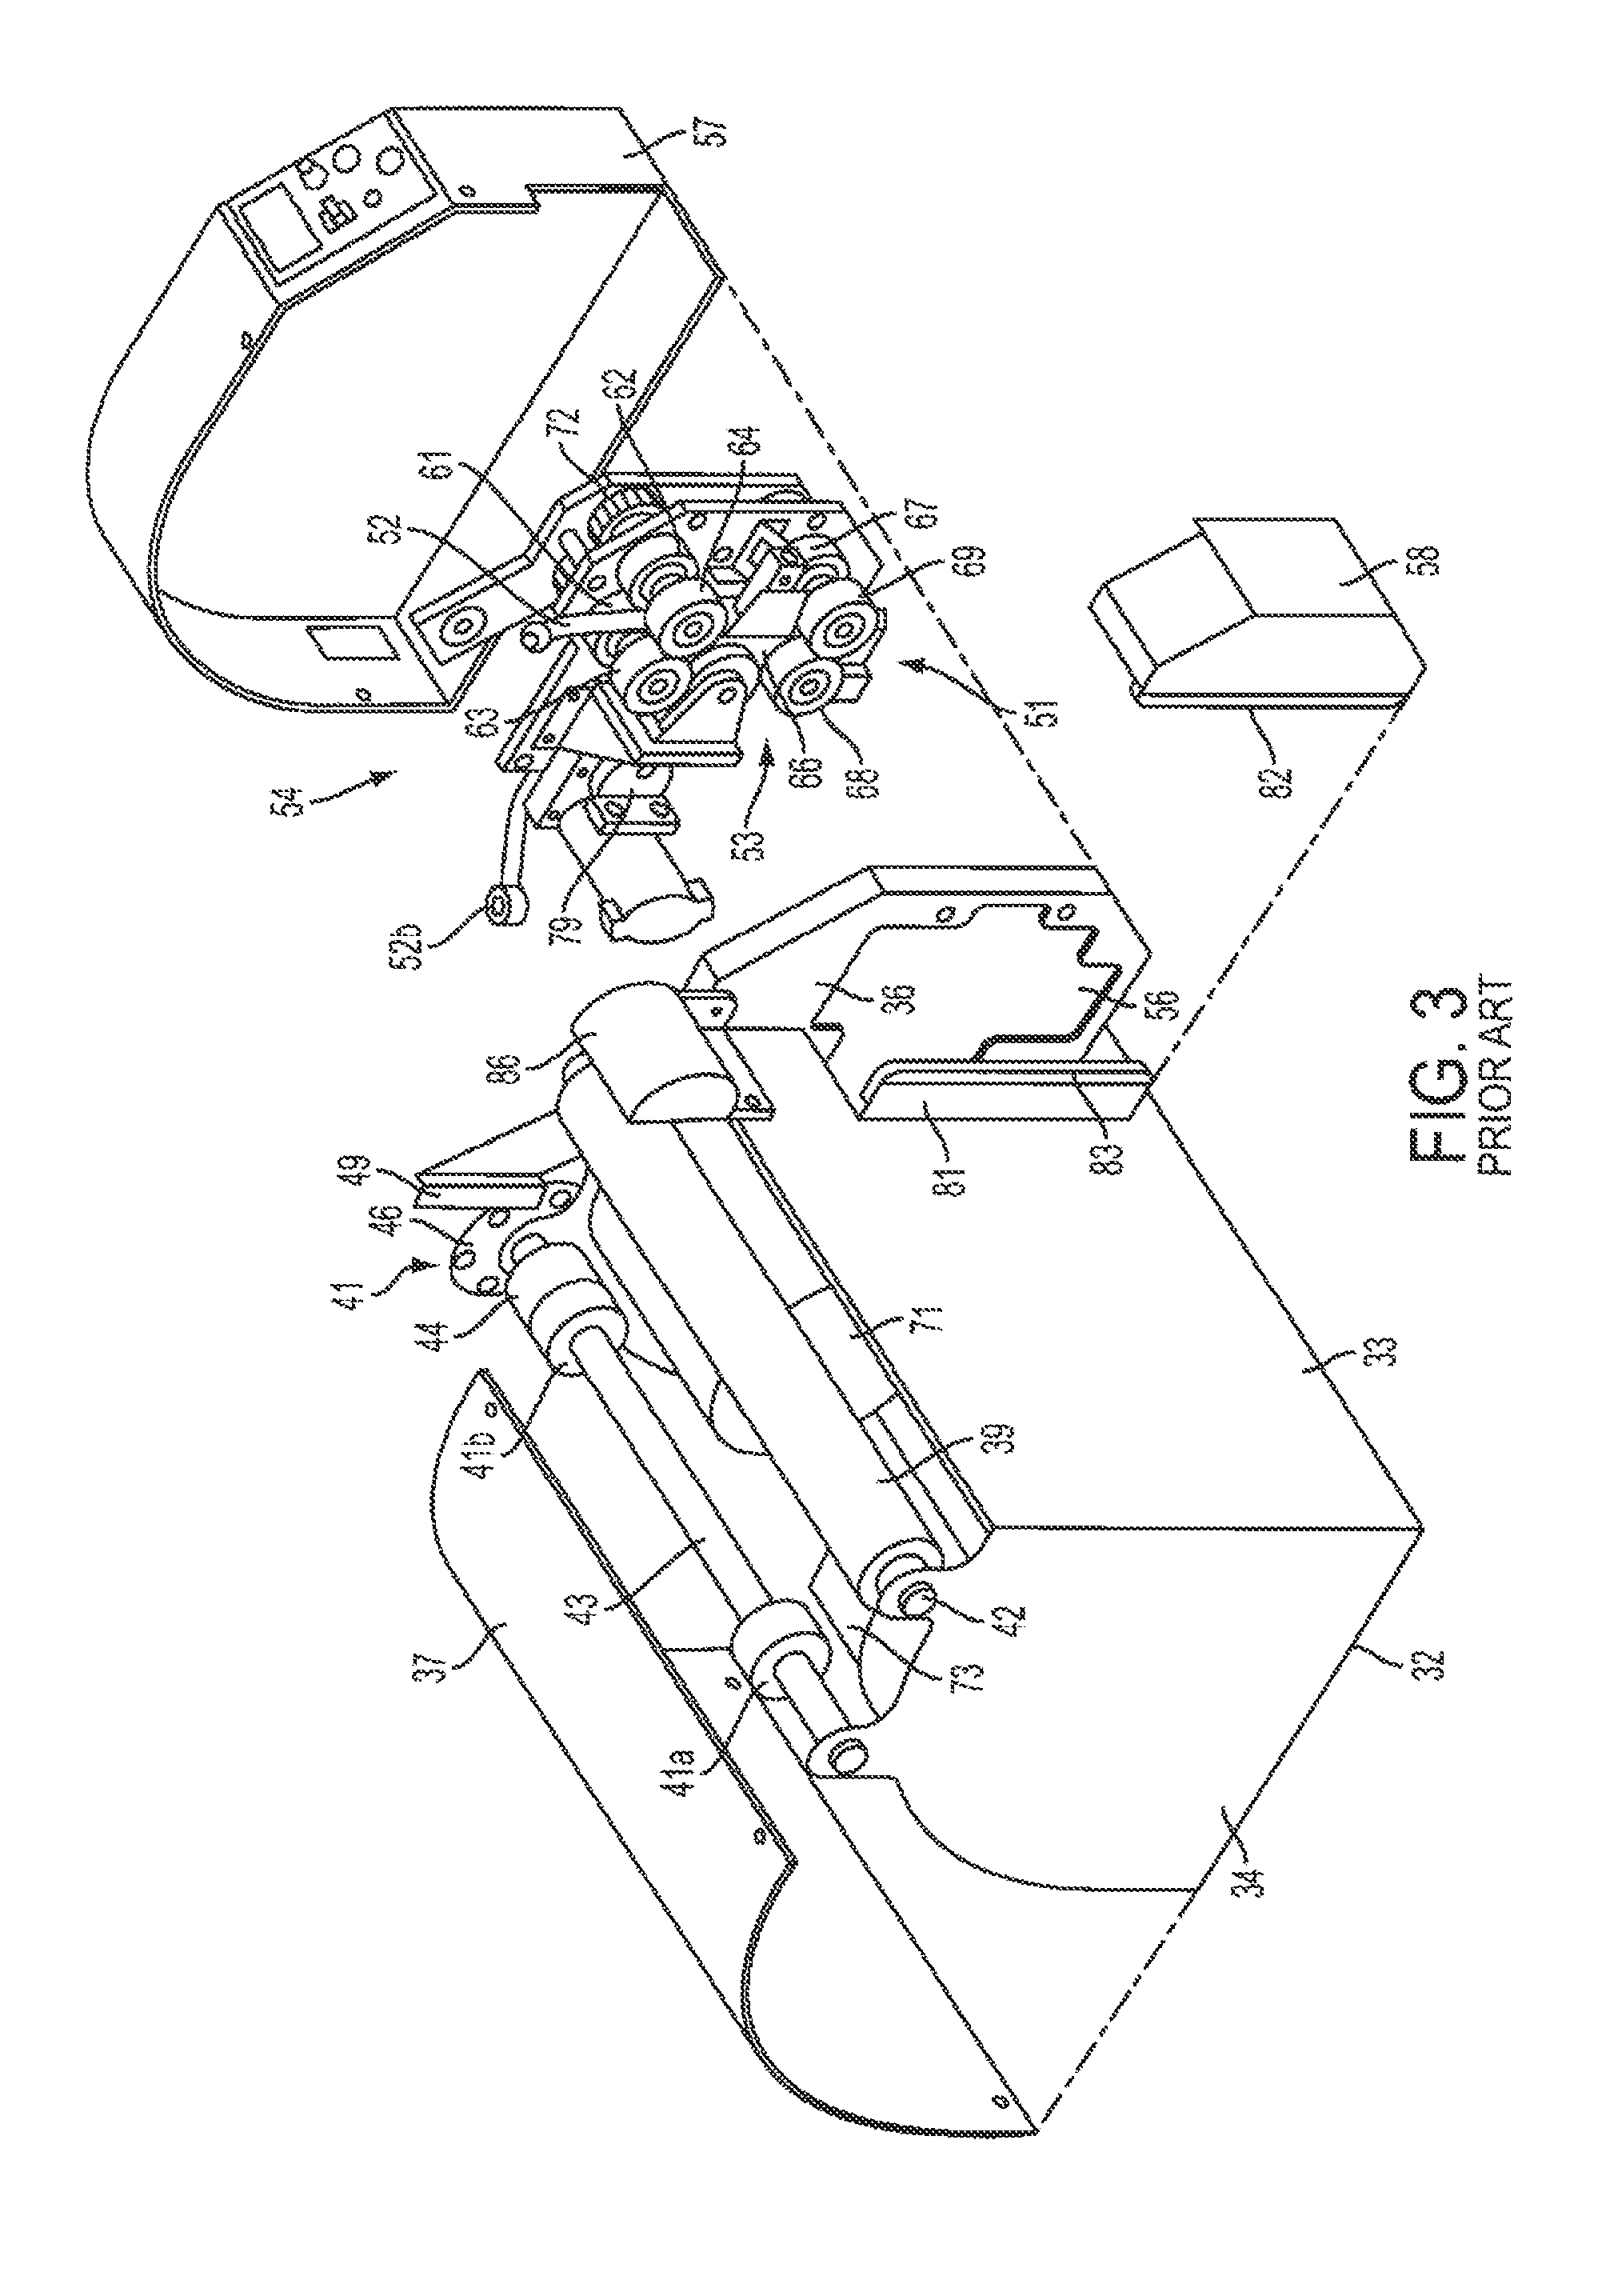 Method and apparatus for inflating and sealing packing cushions with rotary sealing mechanism